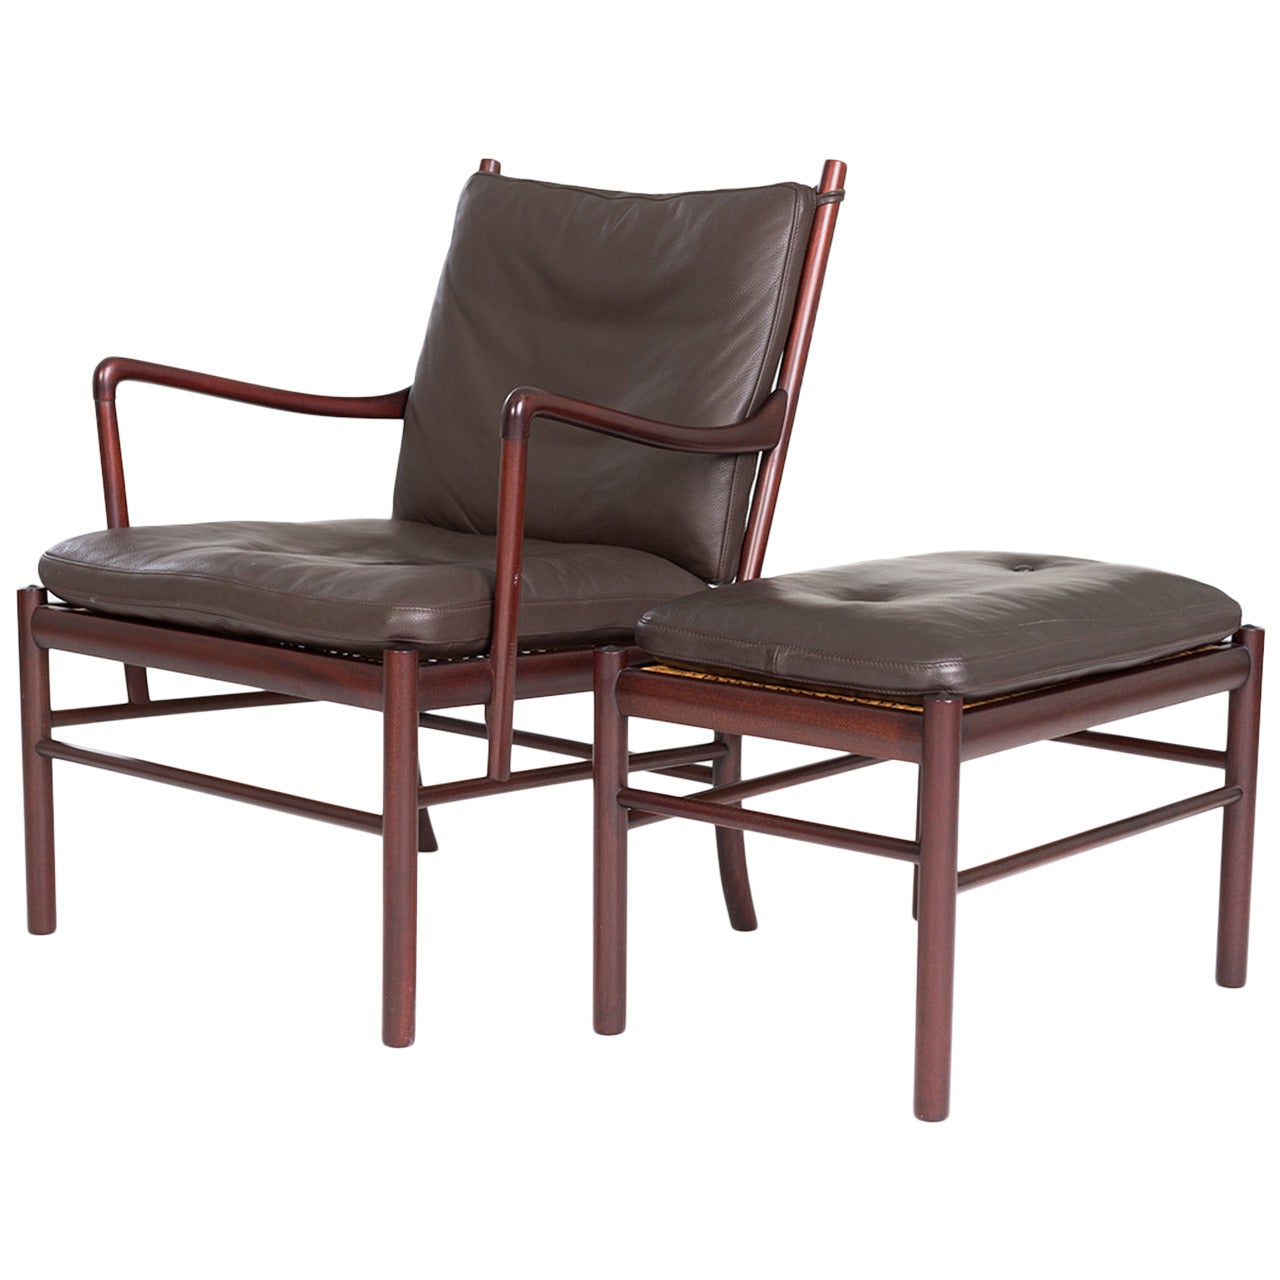 Ole Wanscher Colonial Lounge Chair and Ottoman